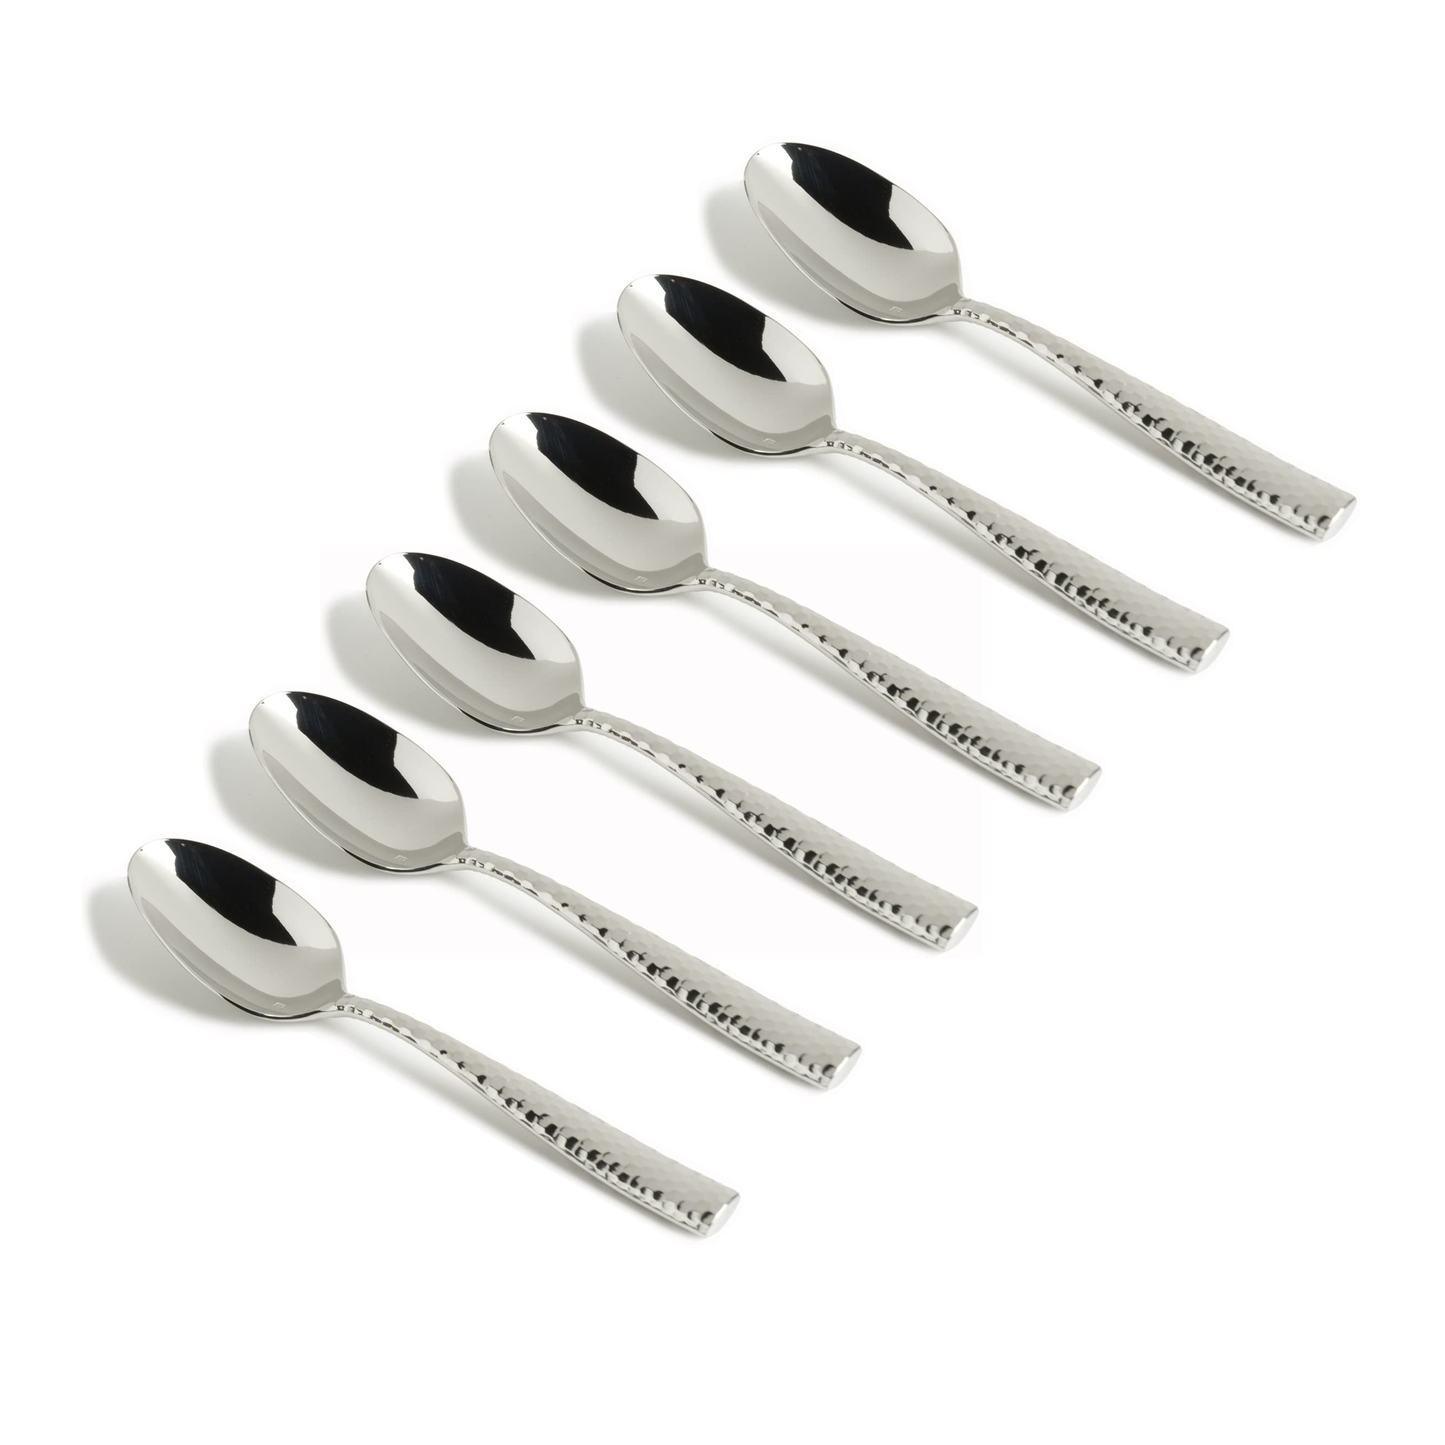 Lucca Faceted Stainless Steel Flatware Espresso Spoon - Set of 6